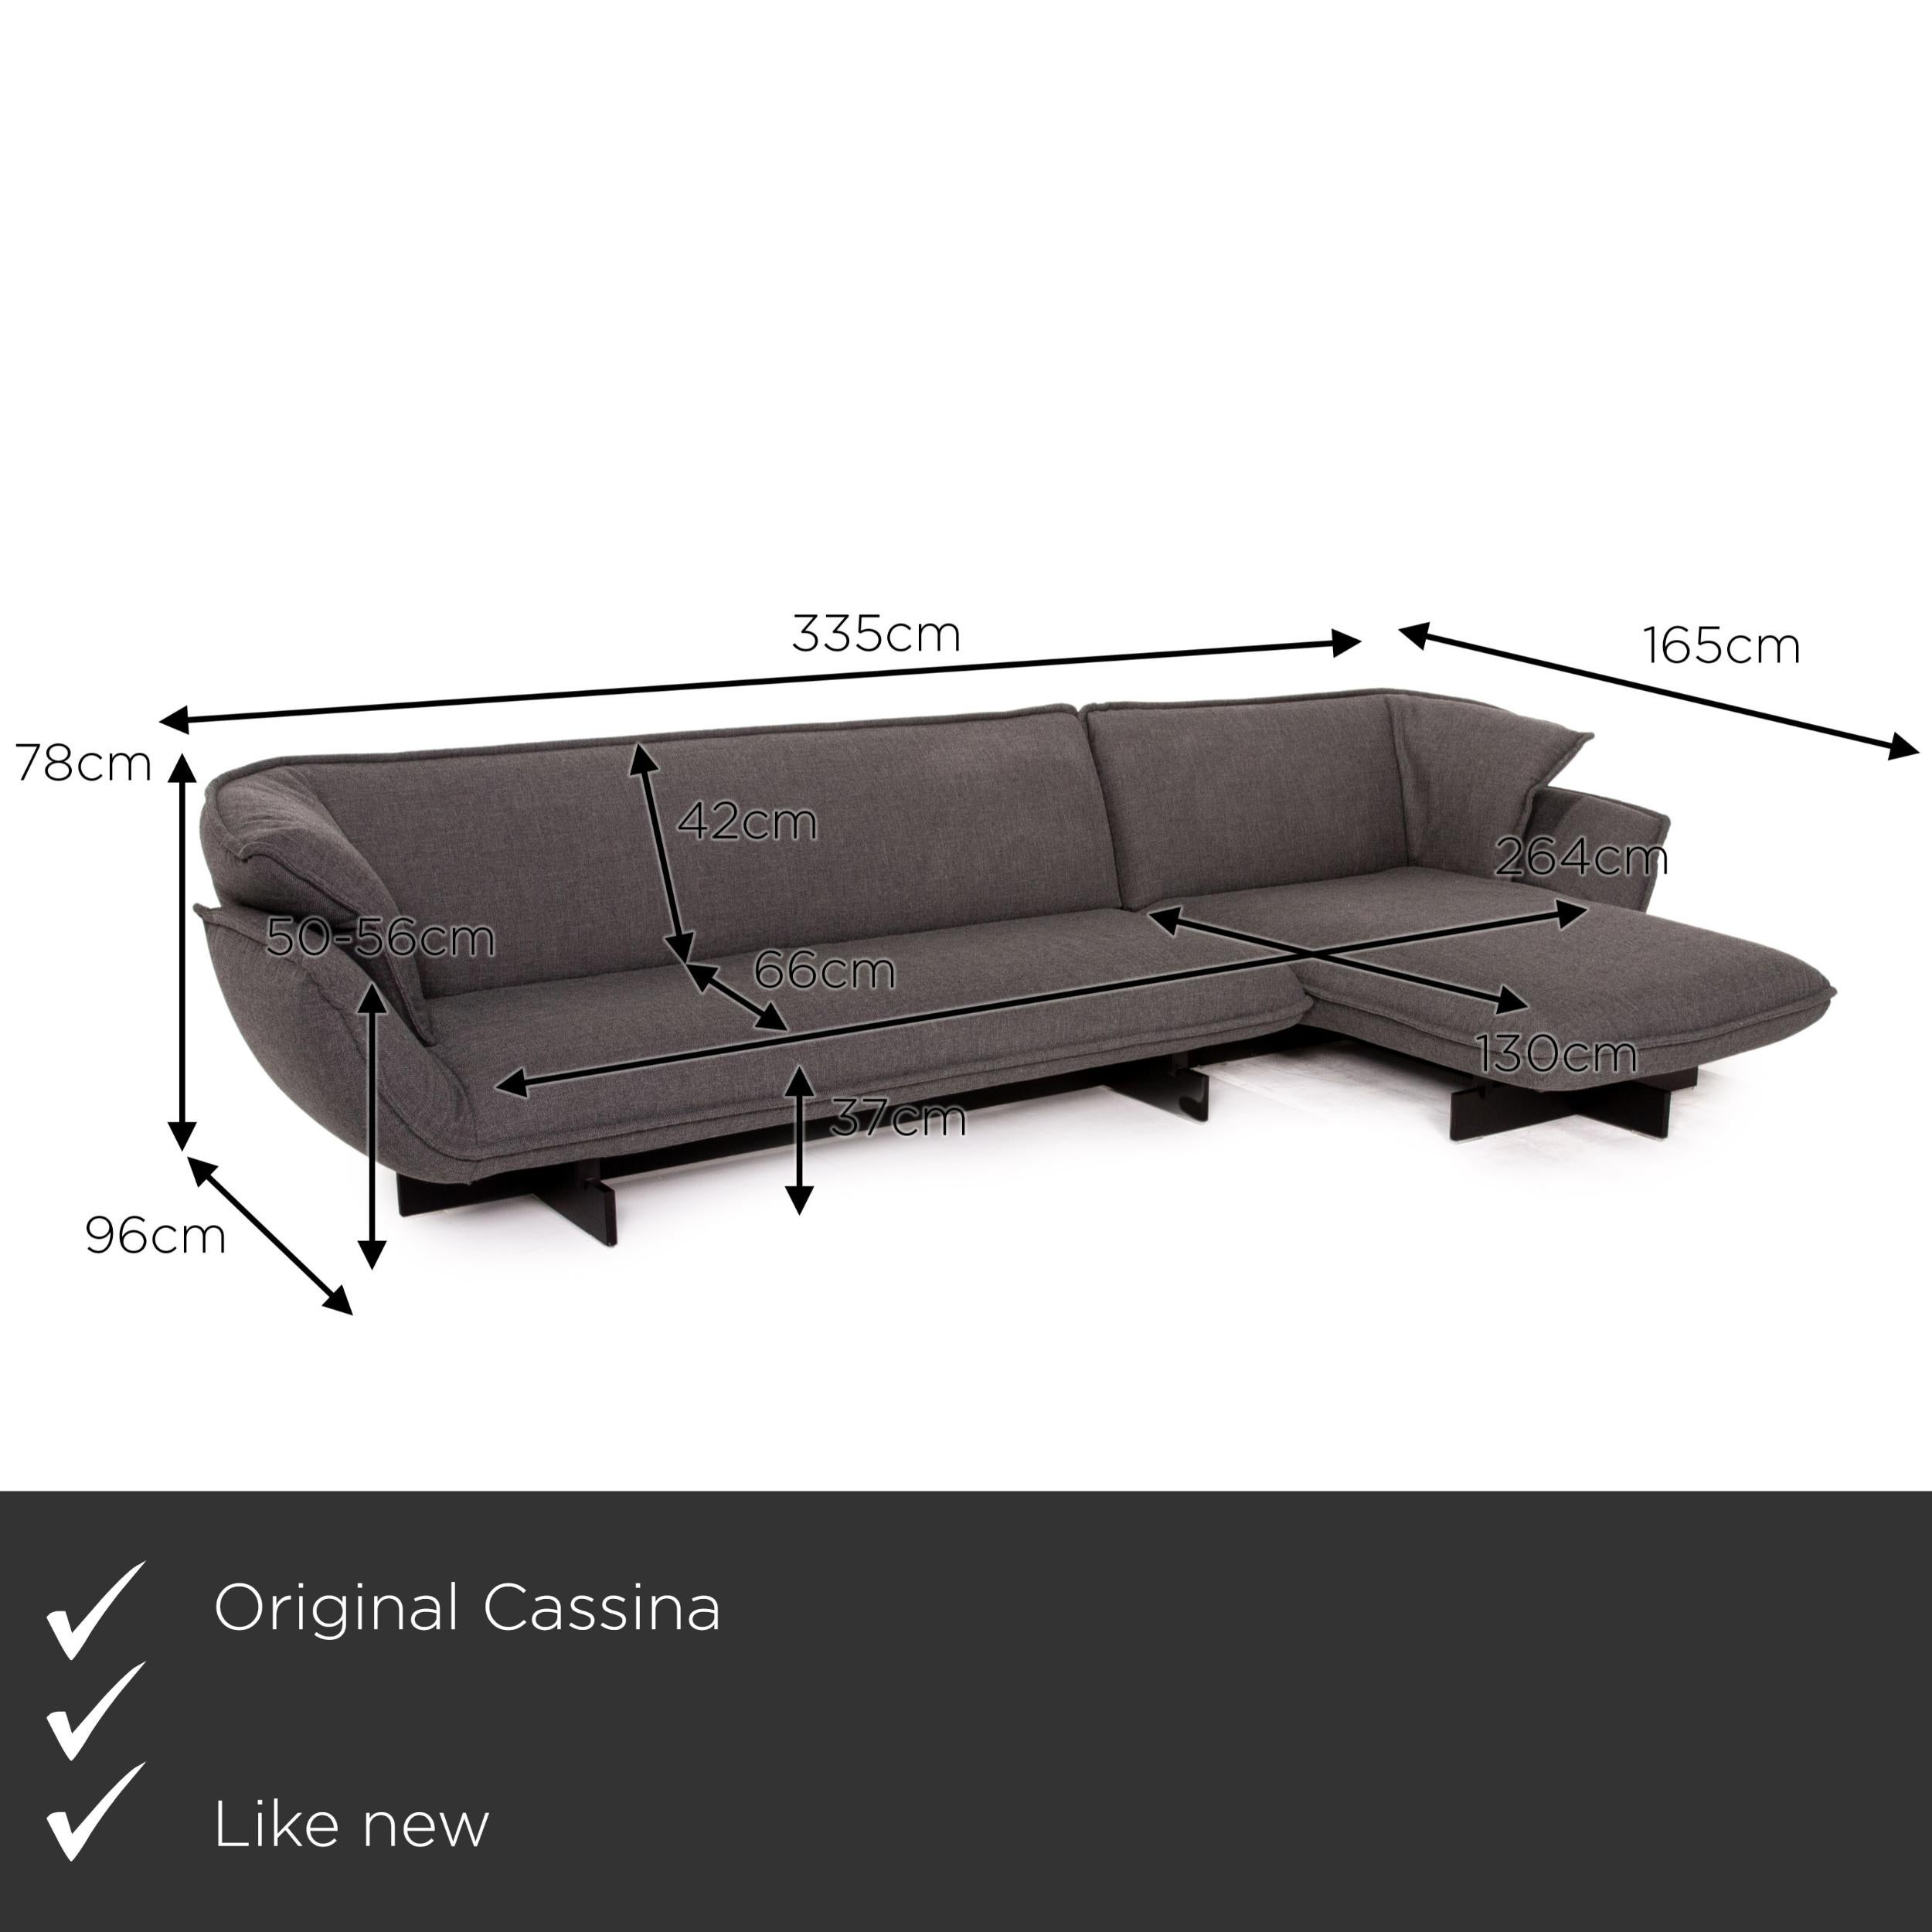 We present to you a Cassina BEAM fabric corner sofa gray sofa couch.


 Product measurements in centimeters:
 

Depth: 96
Width: 335
Height: 78
Seat height: 37
Rest height: 50
Seat depth: 66
Seat width: 264
Back height: 42.
 